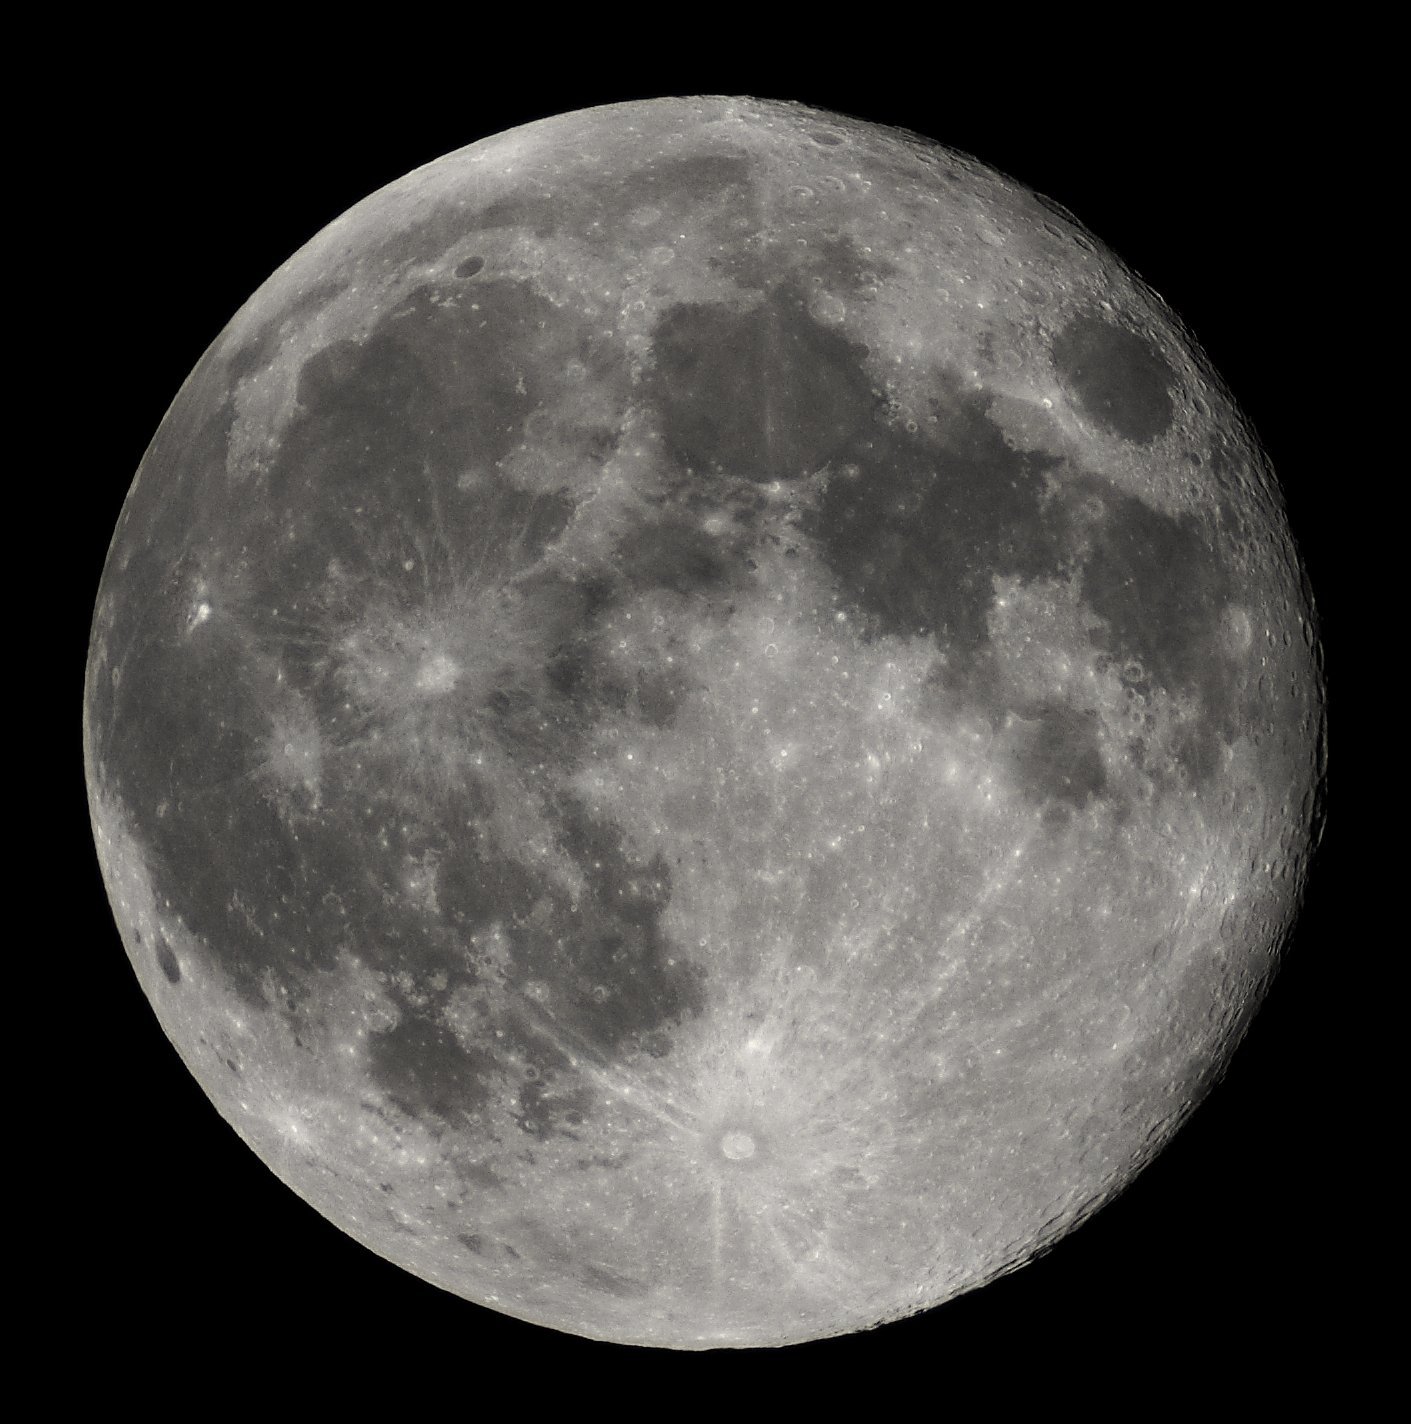 Nearly Full Moon view from Earth in Belgium, Hamois, on October 7, 2006 | Photo: Wikimedia Commons/Luc Viatour